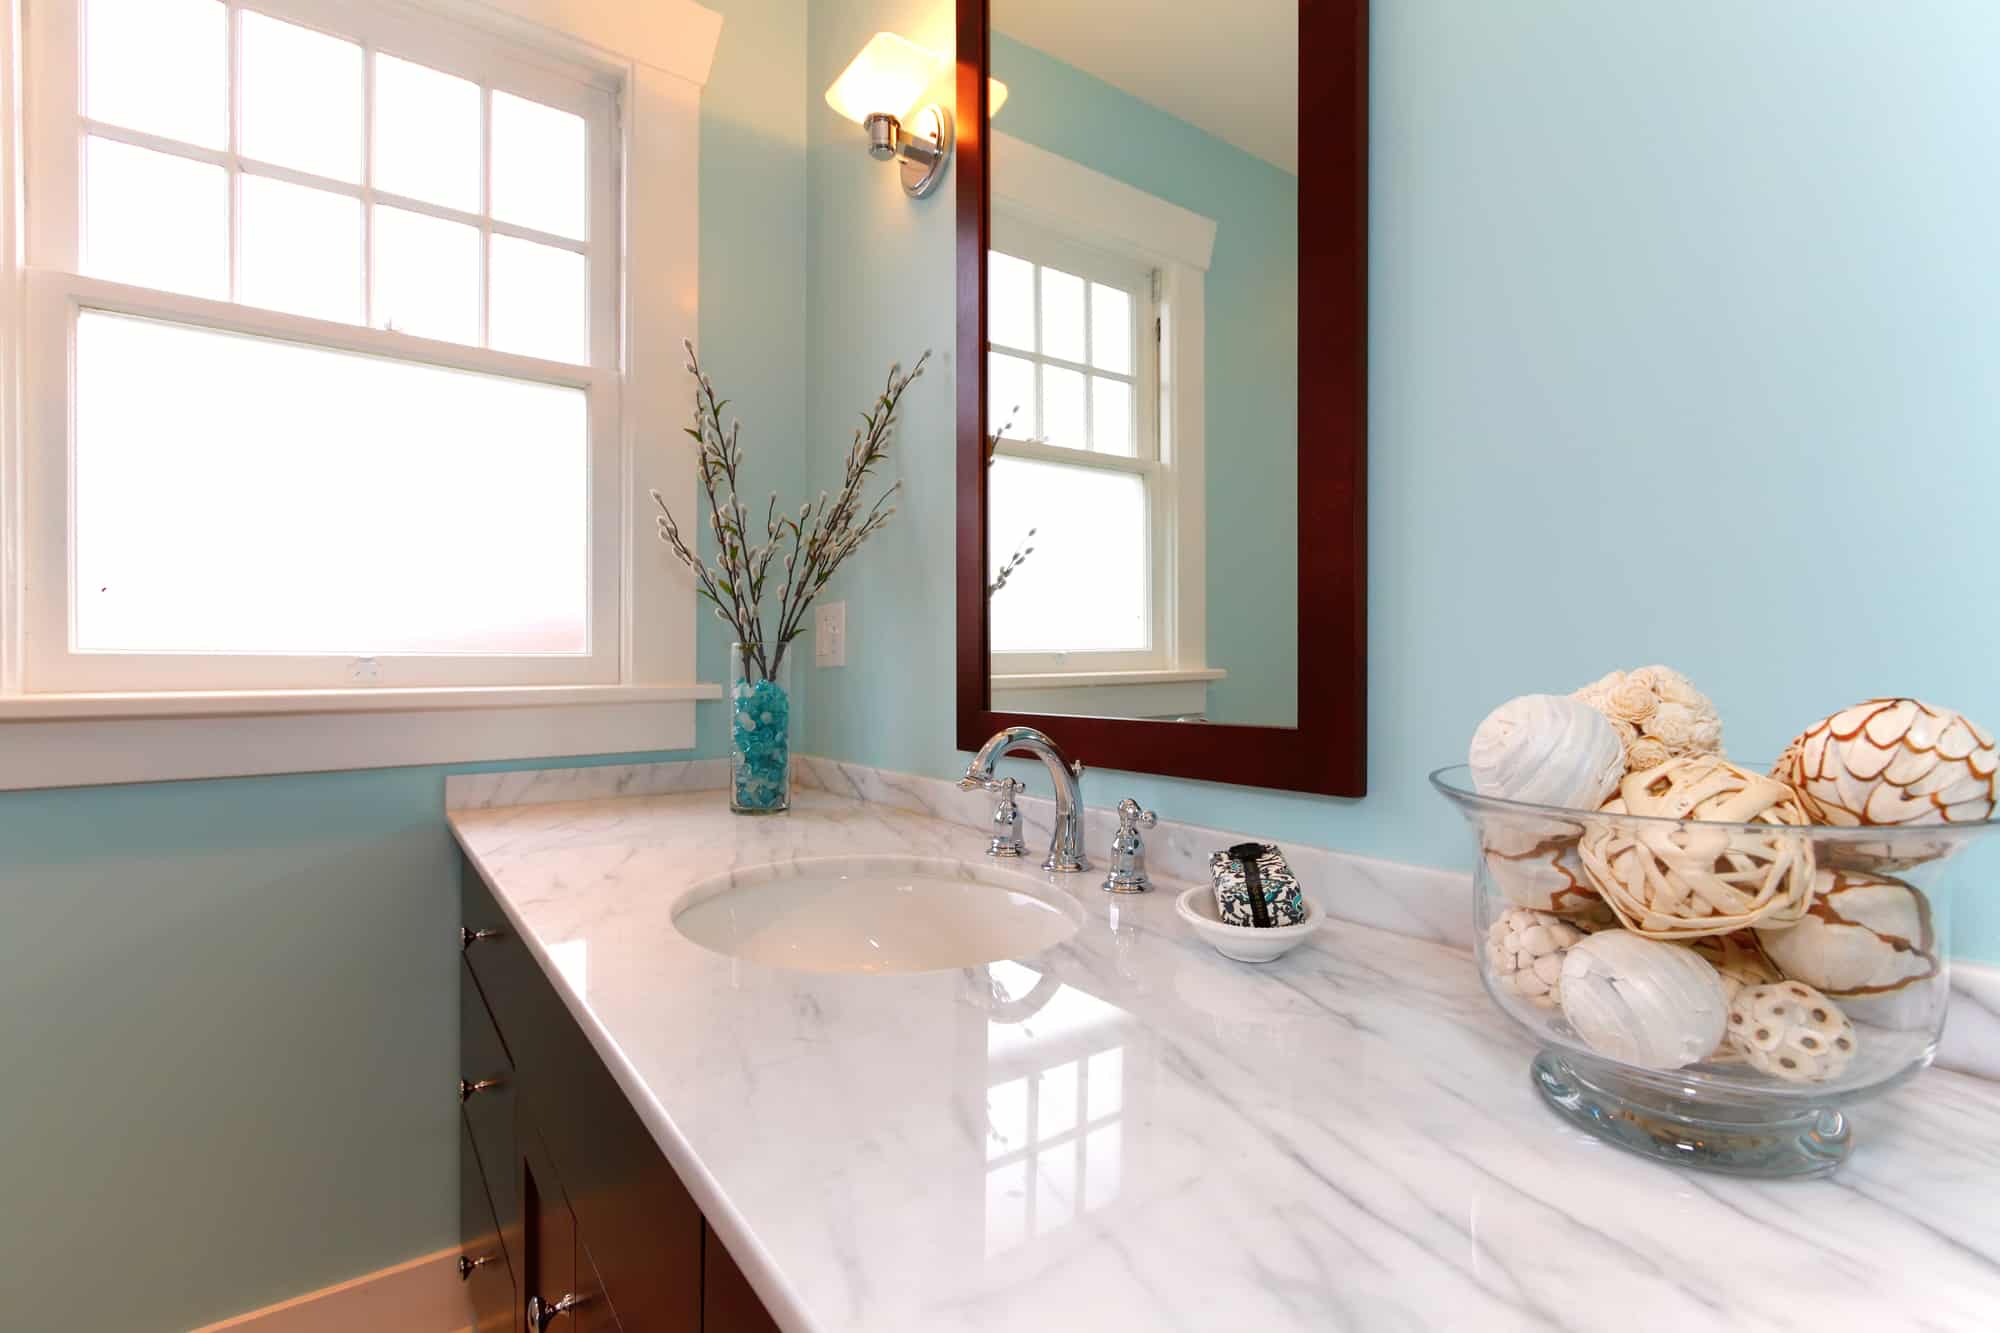 Bathroom with white granite sink, blue walls and wood-framed mirror